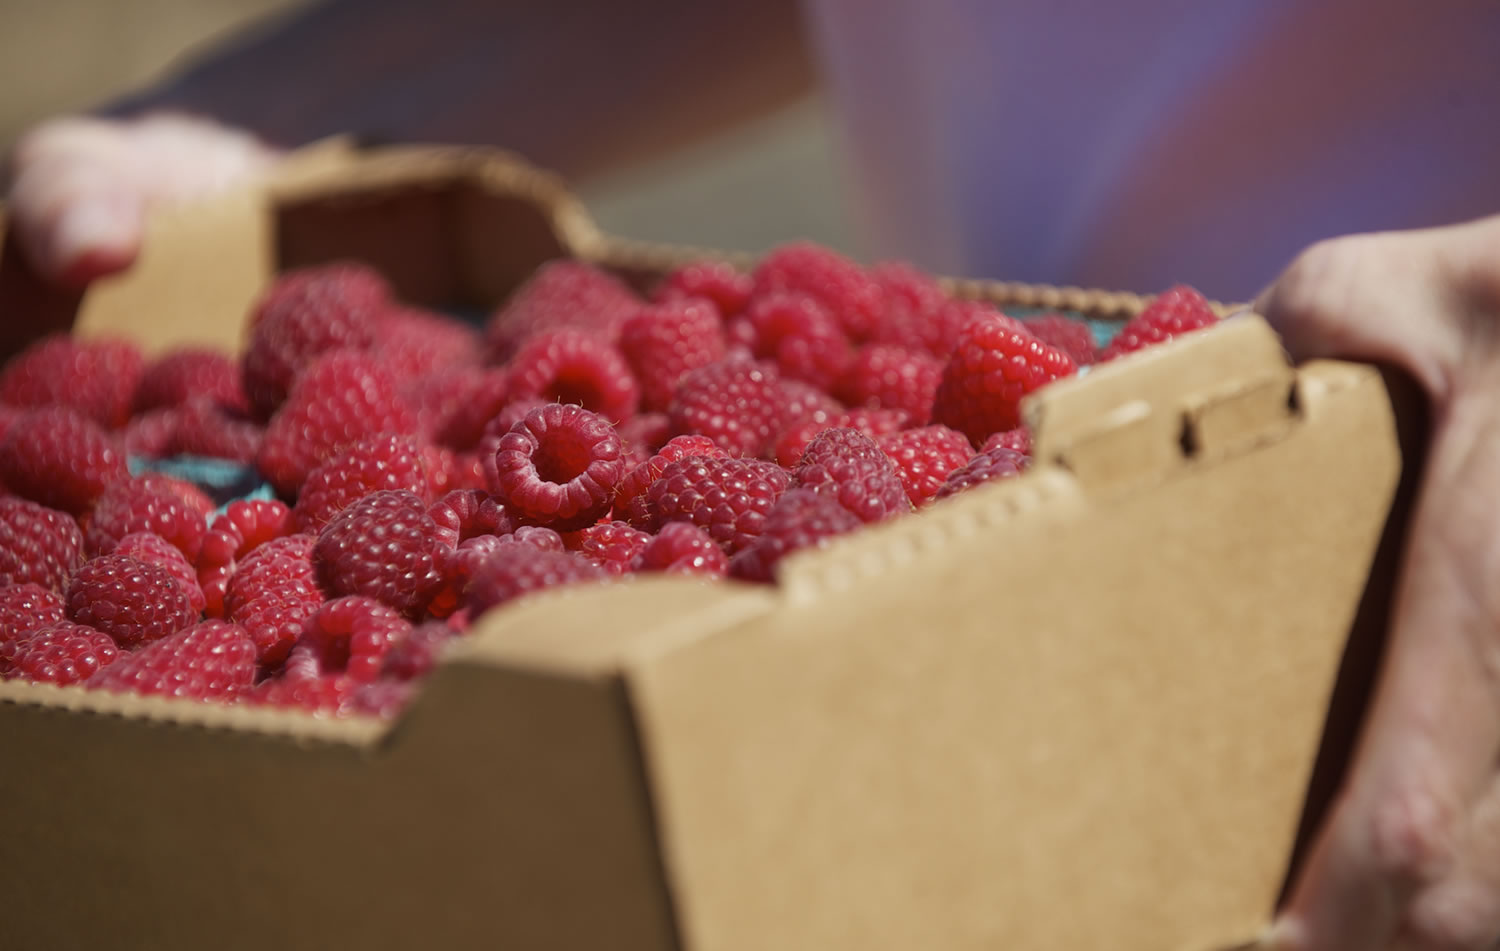 Fresh, local raspberries were among the offerings when the Salmon Creek Farmers' Market opened for the season  Thursday.